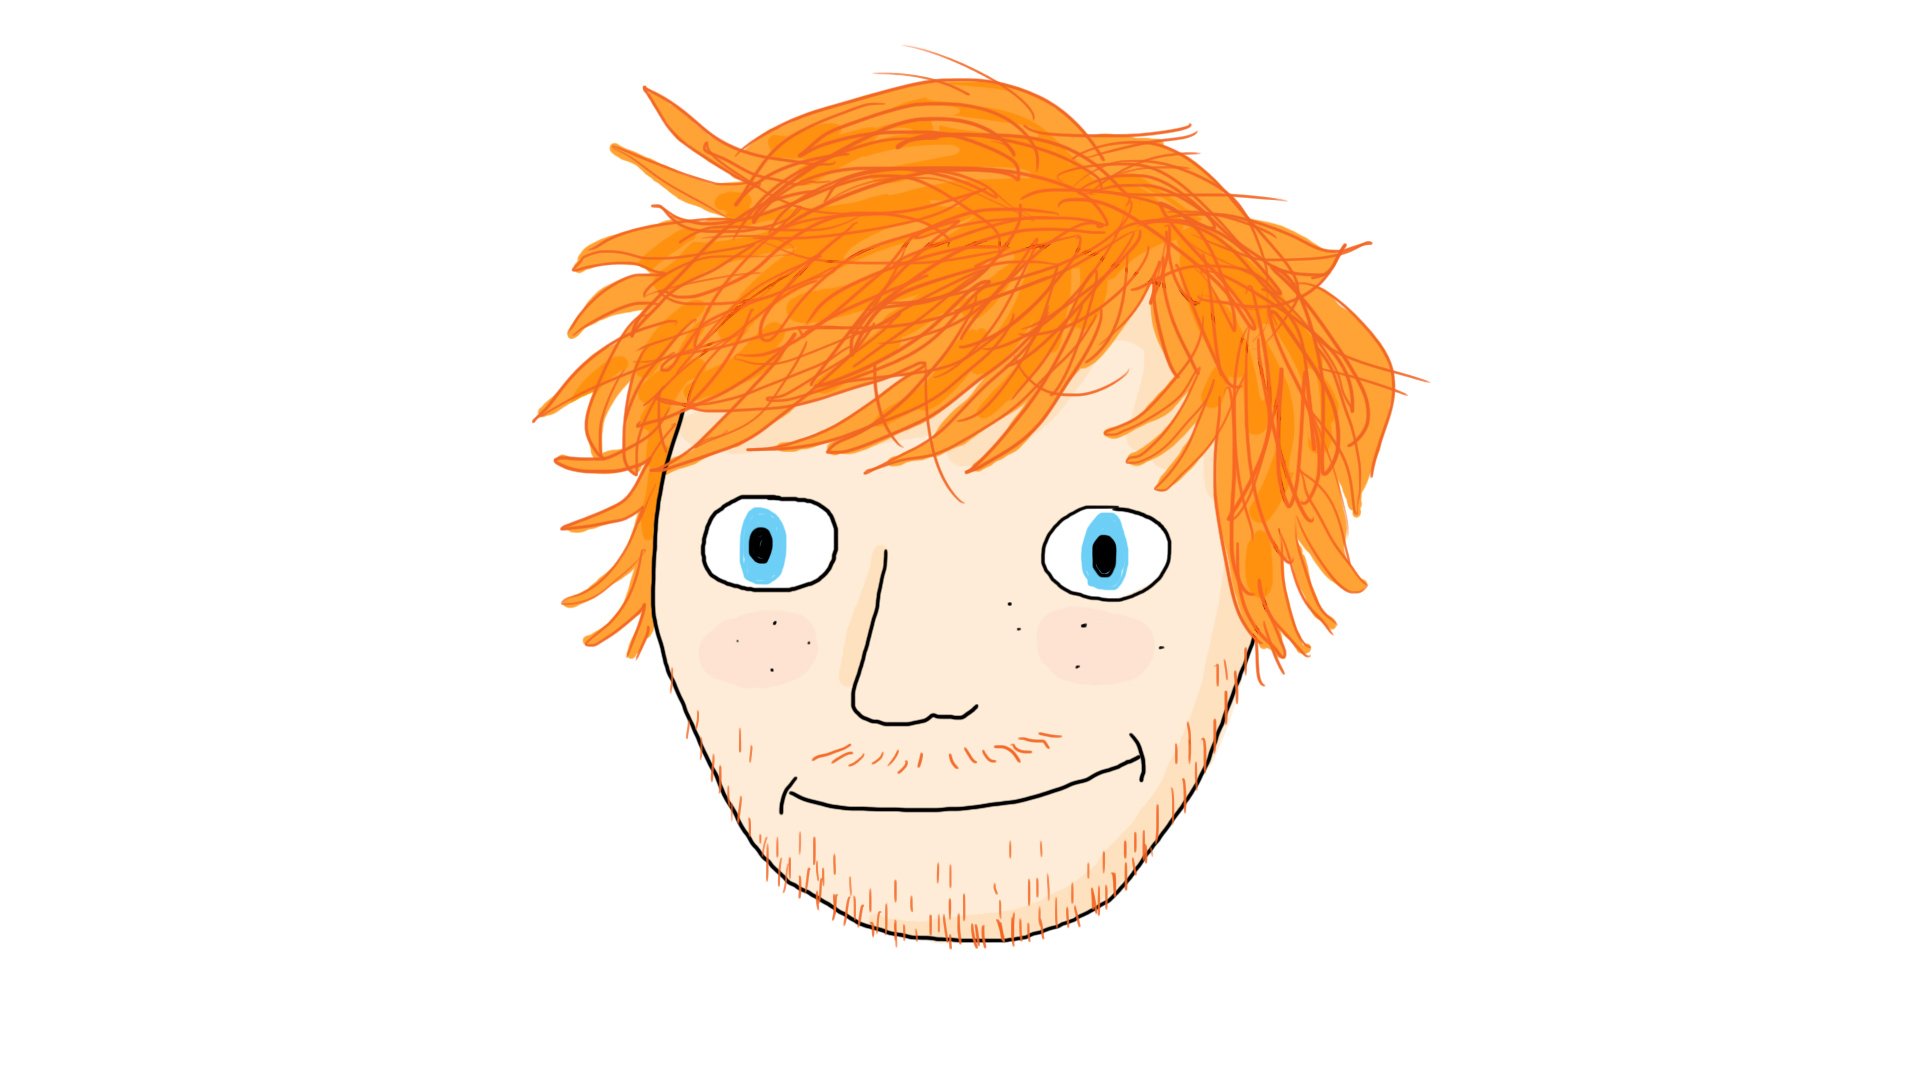 How to Draw Ed Sheeran | Step by Step Drawing 